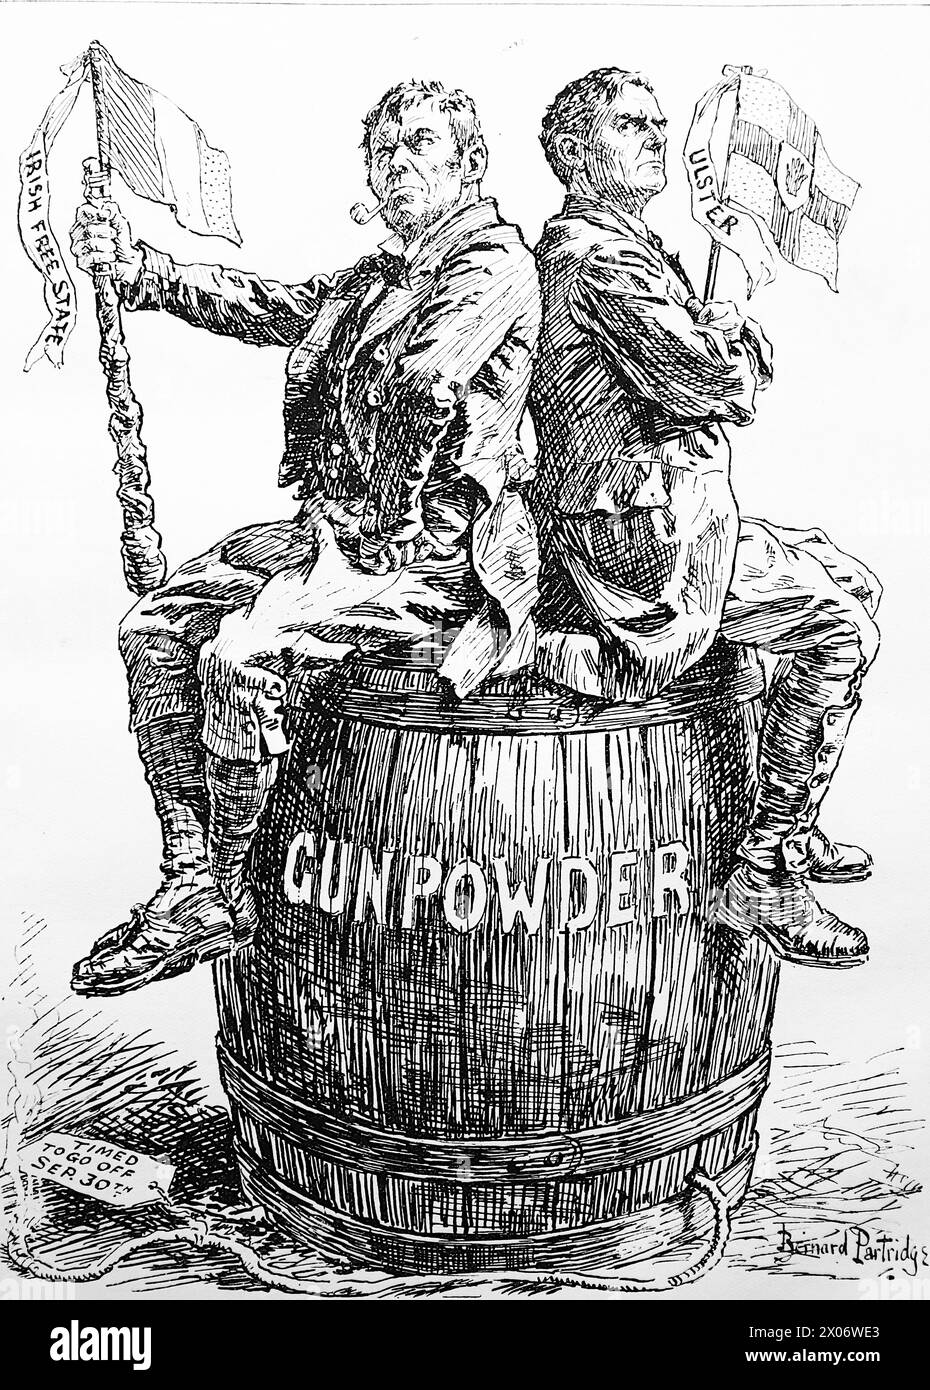 An Interval for Reflection by Bernard Partridge, 13 August 1924, showing a representative of Northern Ireland and another of the Irish Free State, both seated on a gunpowder barrel. Photograph from a line drawing originally printed in the Punch and London Charivari periodical in 1924. This is a good example of the skilful artists and the humour and satire of the time. Stock Photo